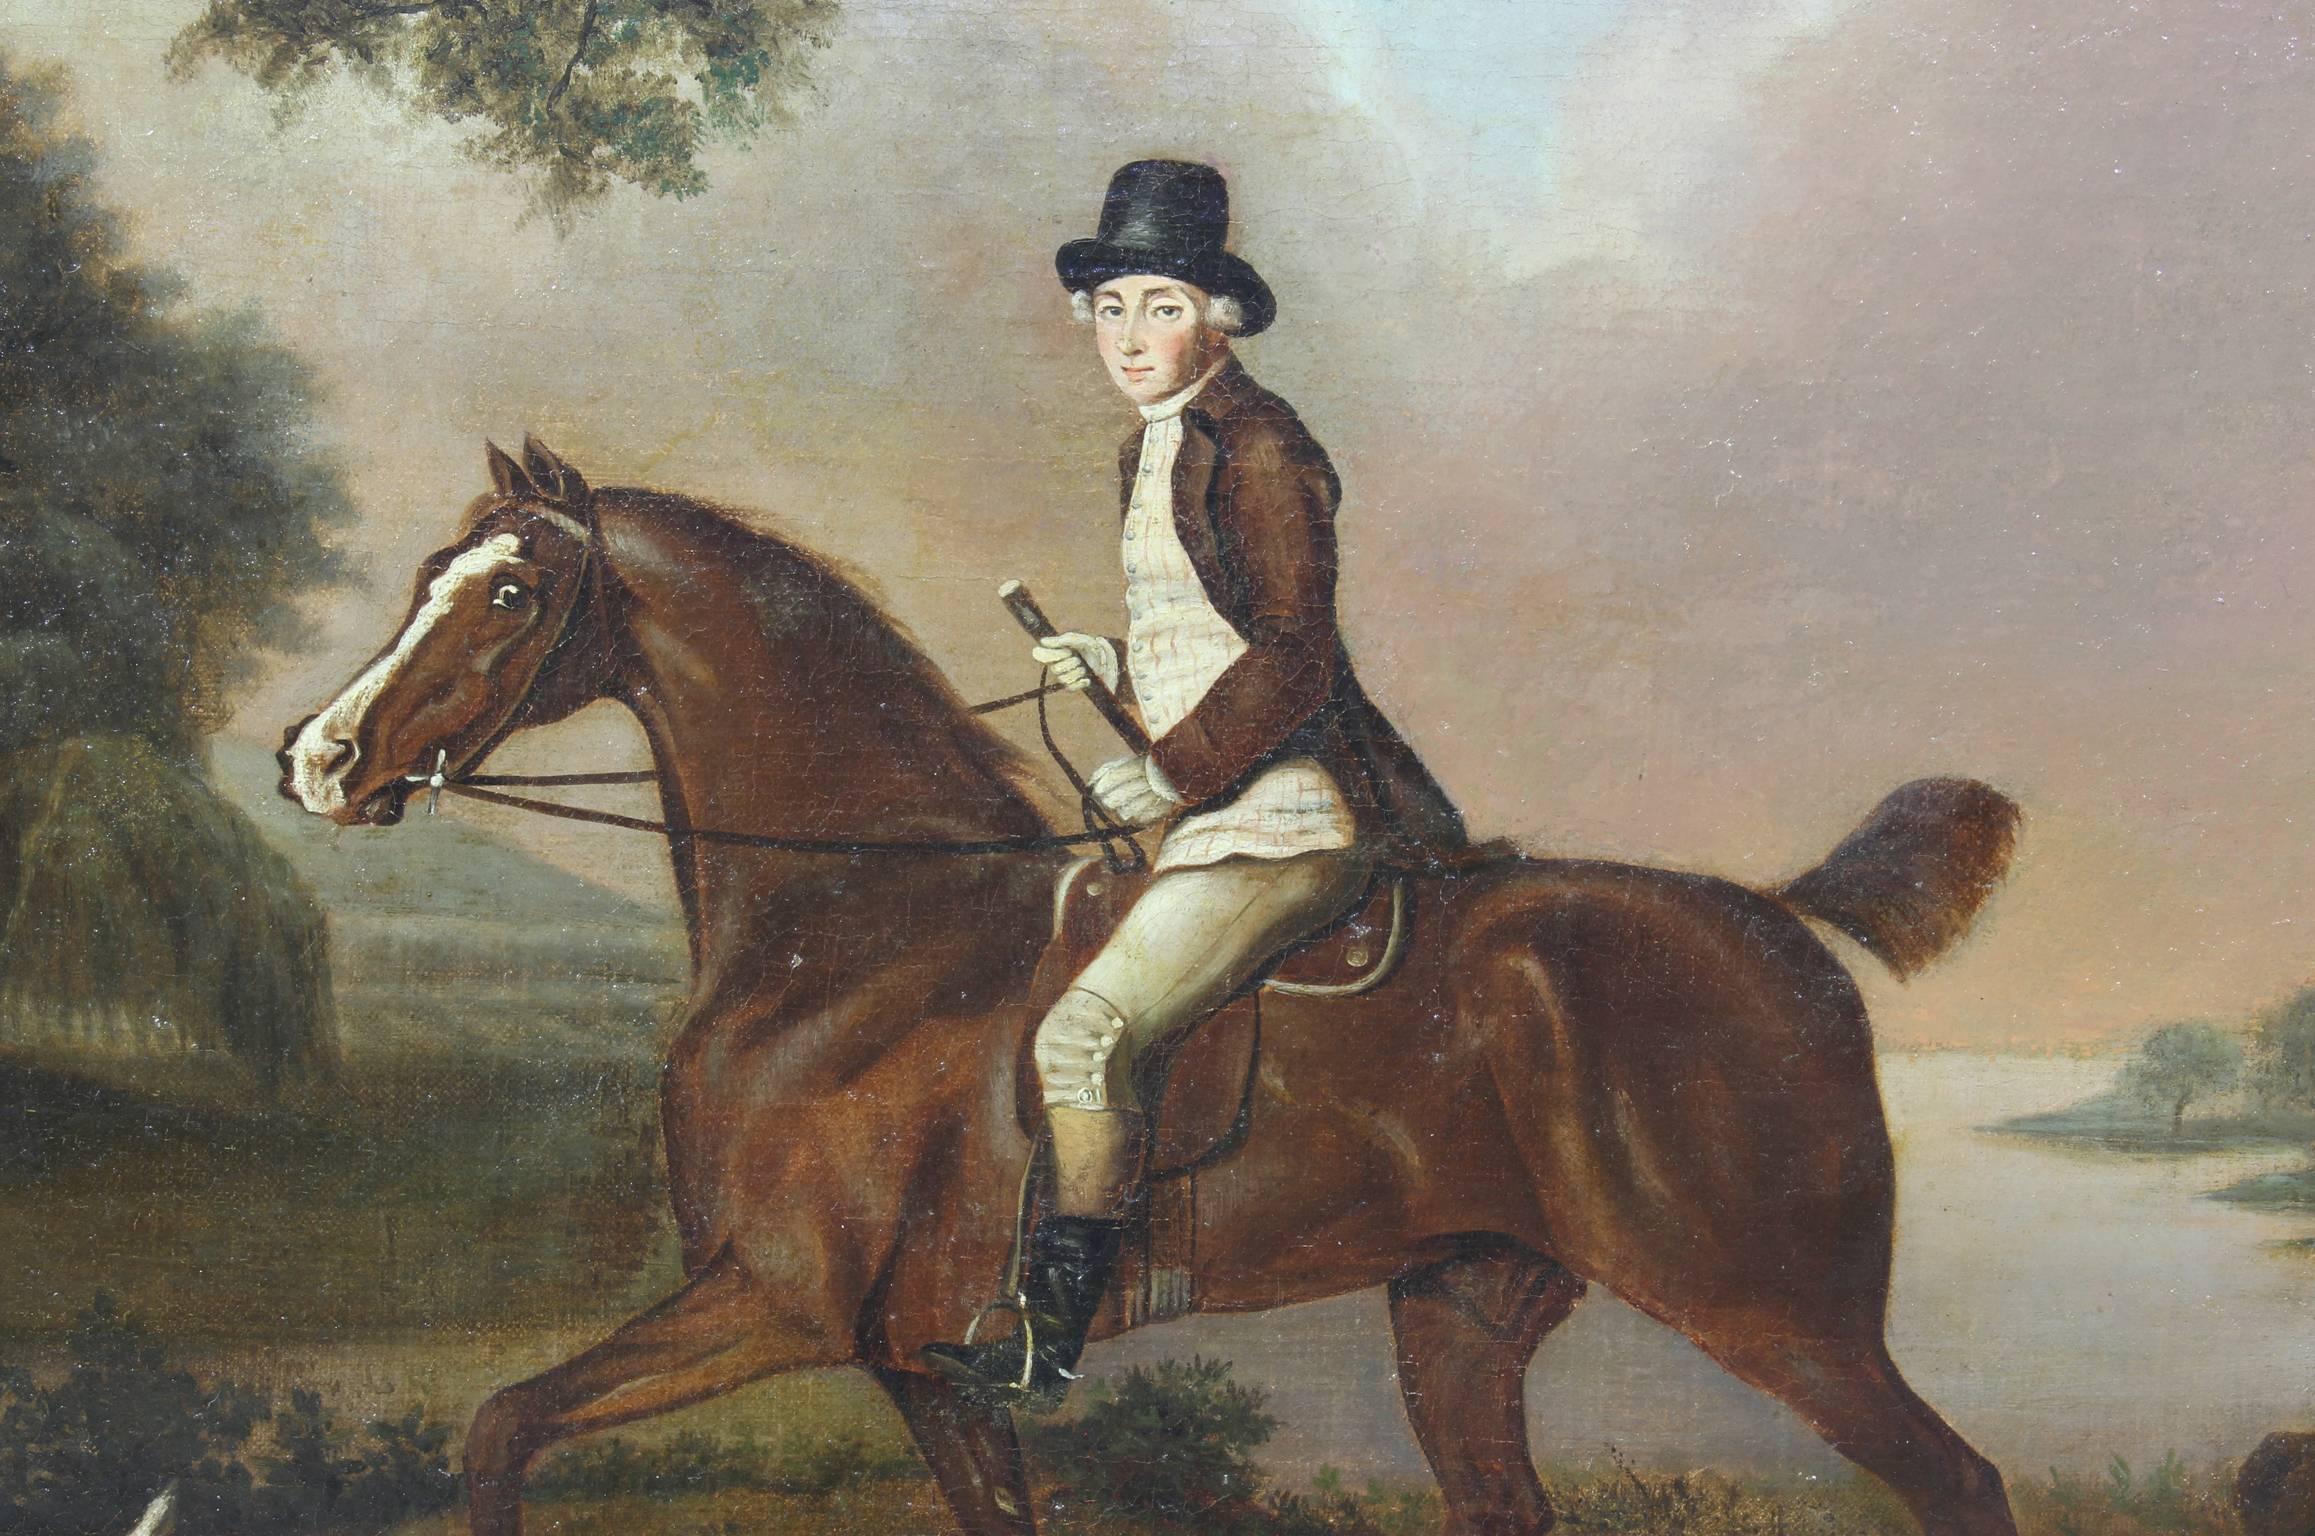 Sporting Art Late 18th Century English Sporting Painting in the Manner of George Stubbs